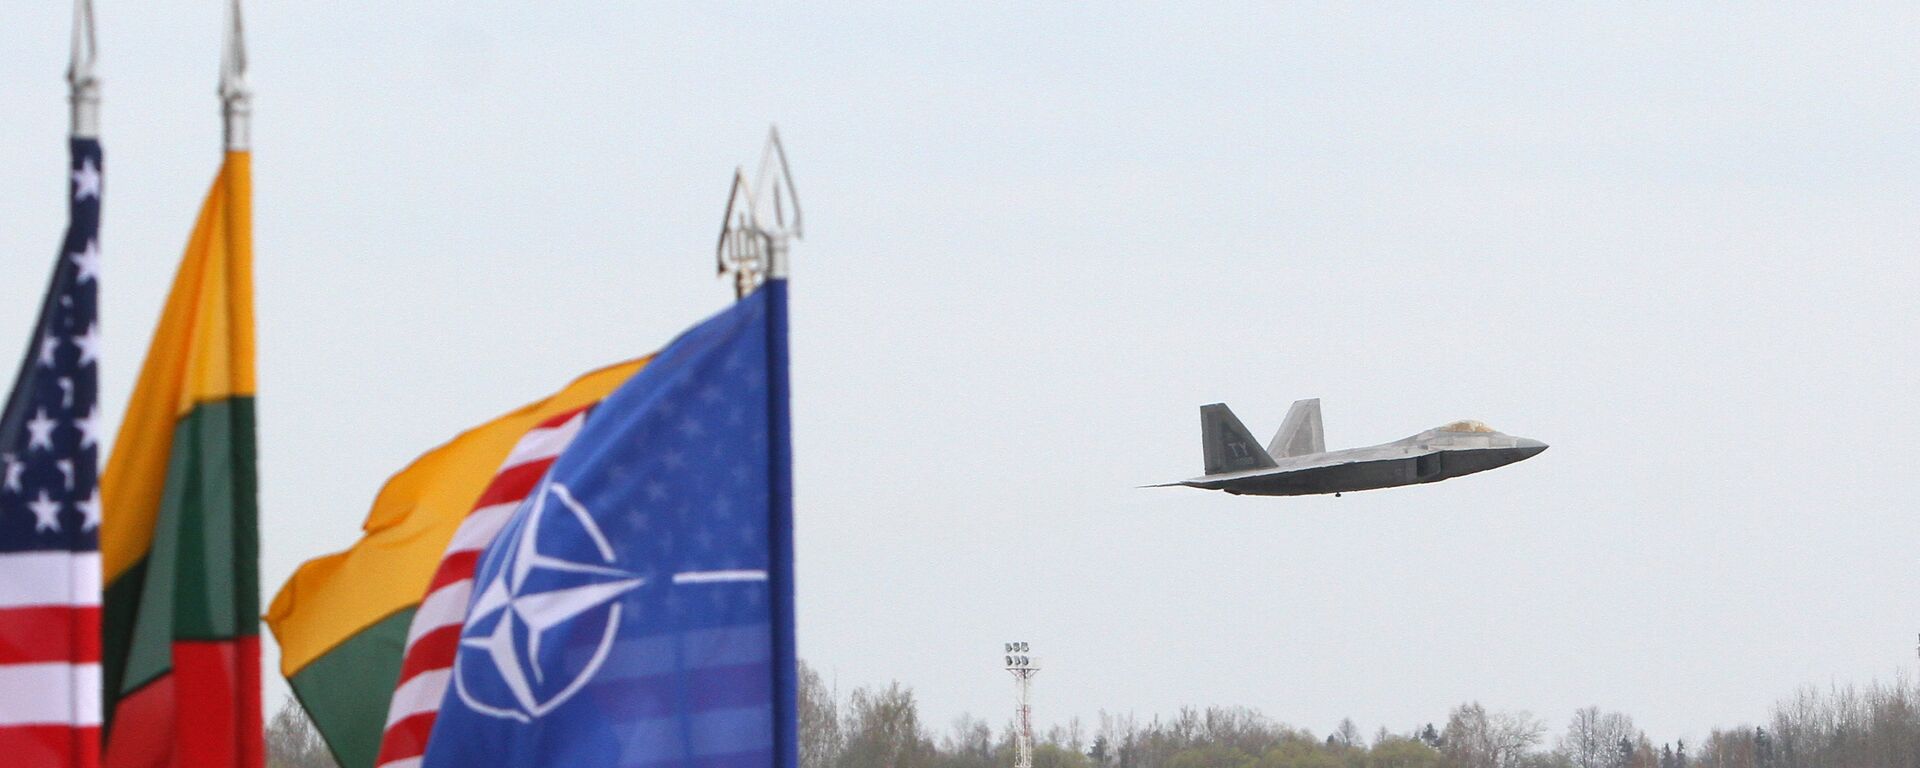 A US Air Force F-22 Raptor fighter aircraft flies at the Air Base of the Lithuanian Armed Forces in Šiauliai, Lithuania, on April 27, 2016 behind flags of US, Lithiania and the NATO - Sputnik International, 1920, 13.07.2022